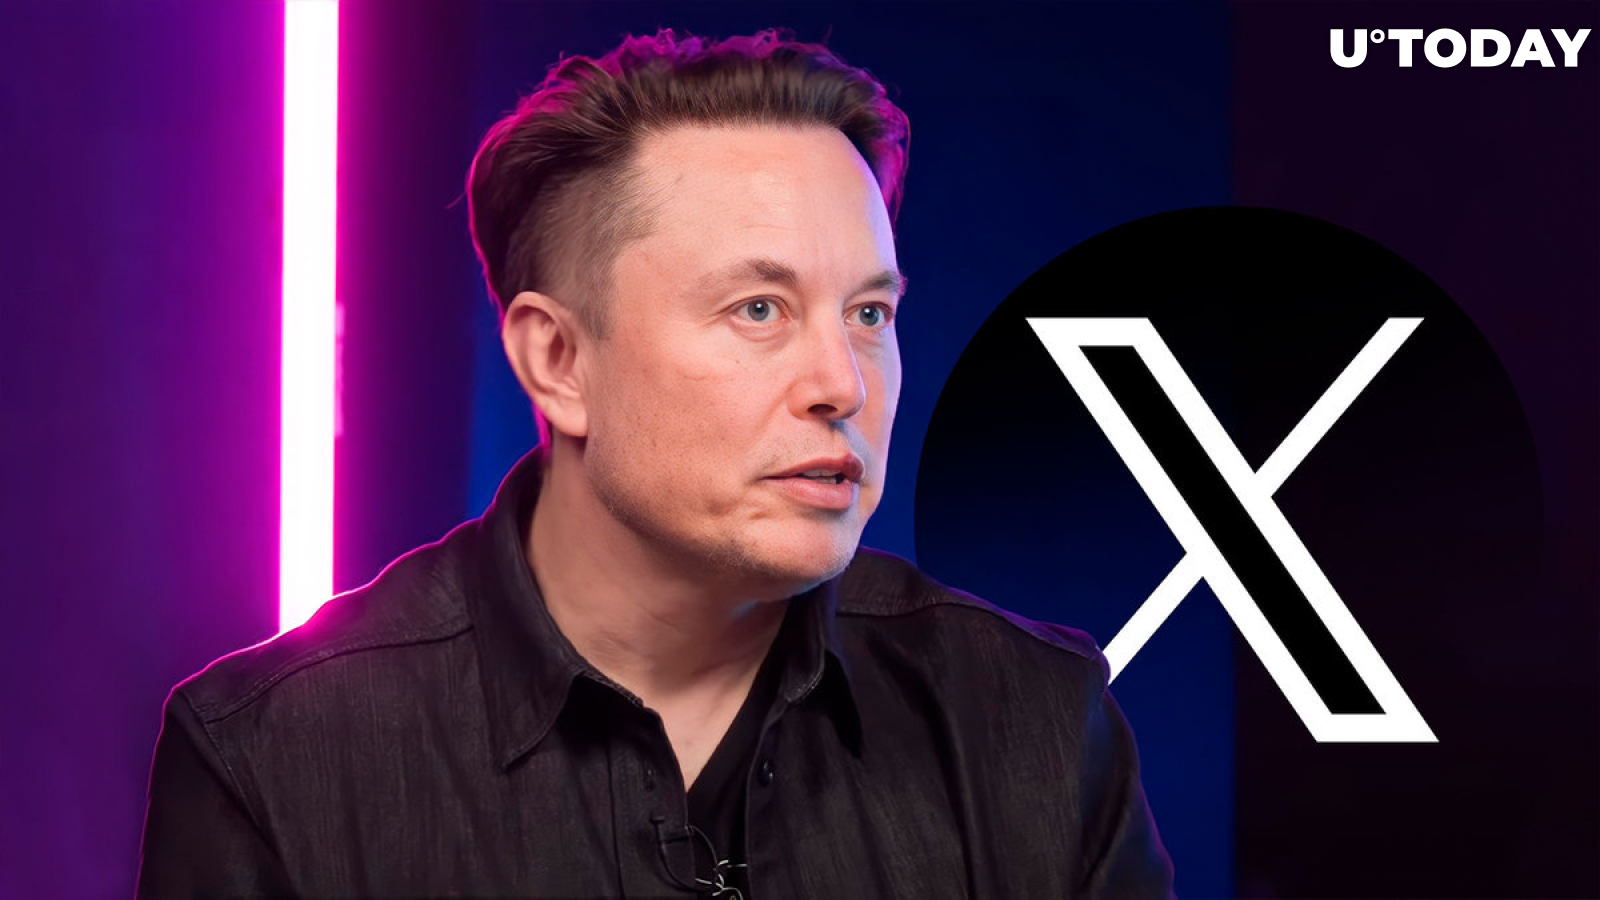 Elon Musk Adds Enthusiasm to Crypto Community With His New 'Hold' Tweet